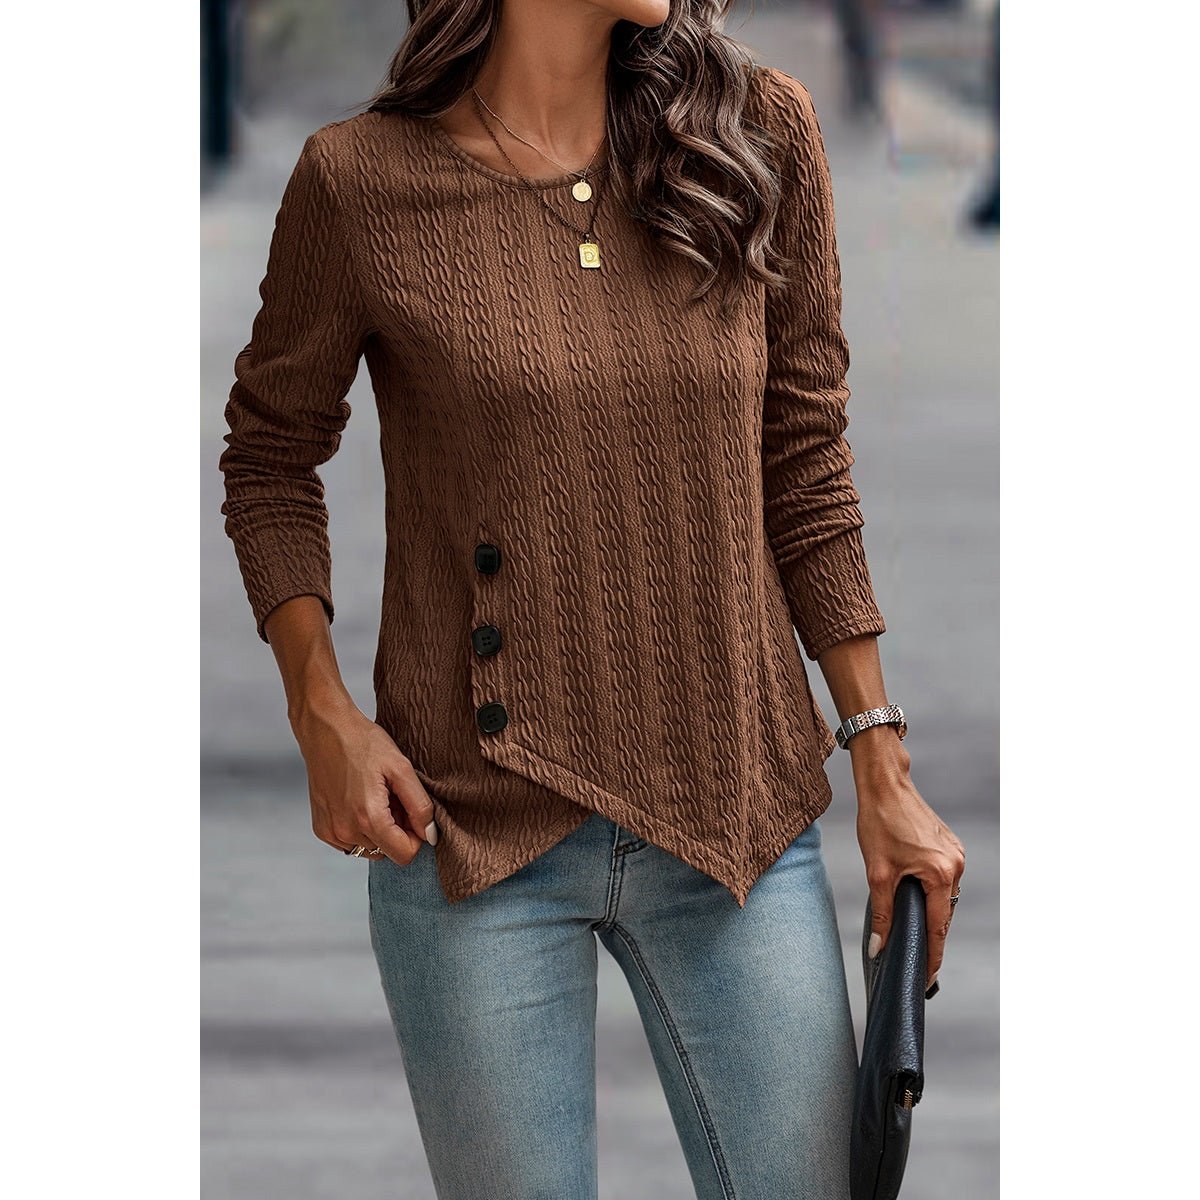 Comfy Chic Buttoned Boat Neck Knit Top - MVTFASHION